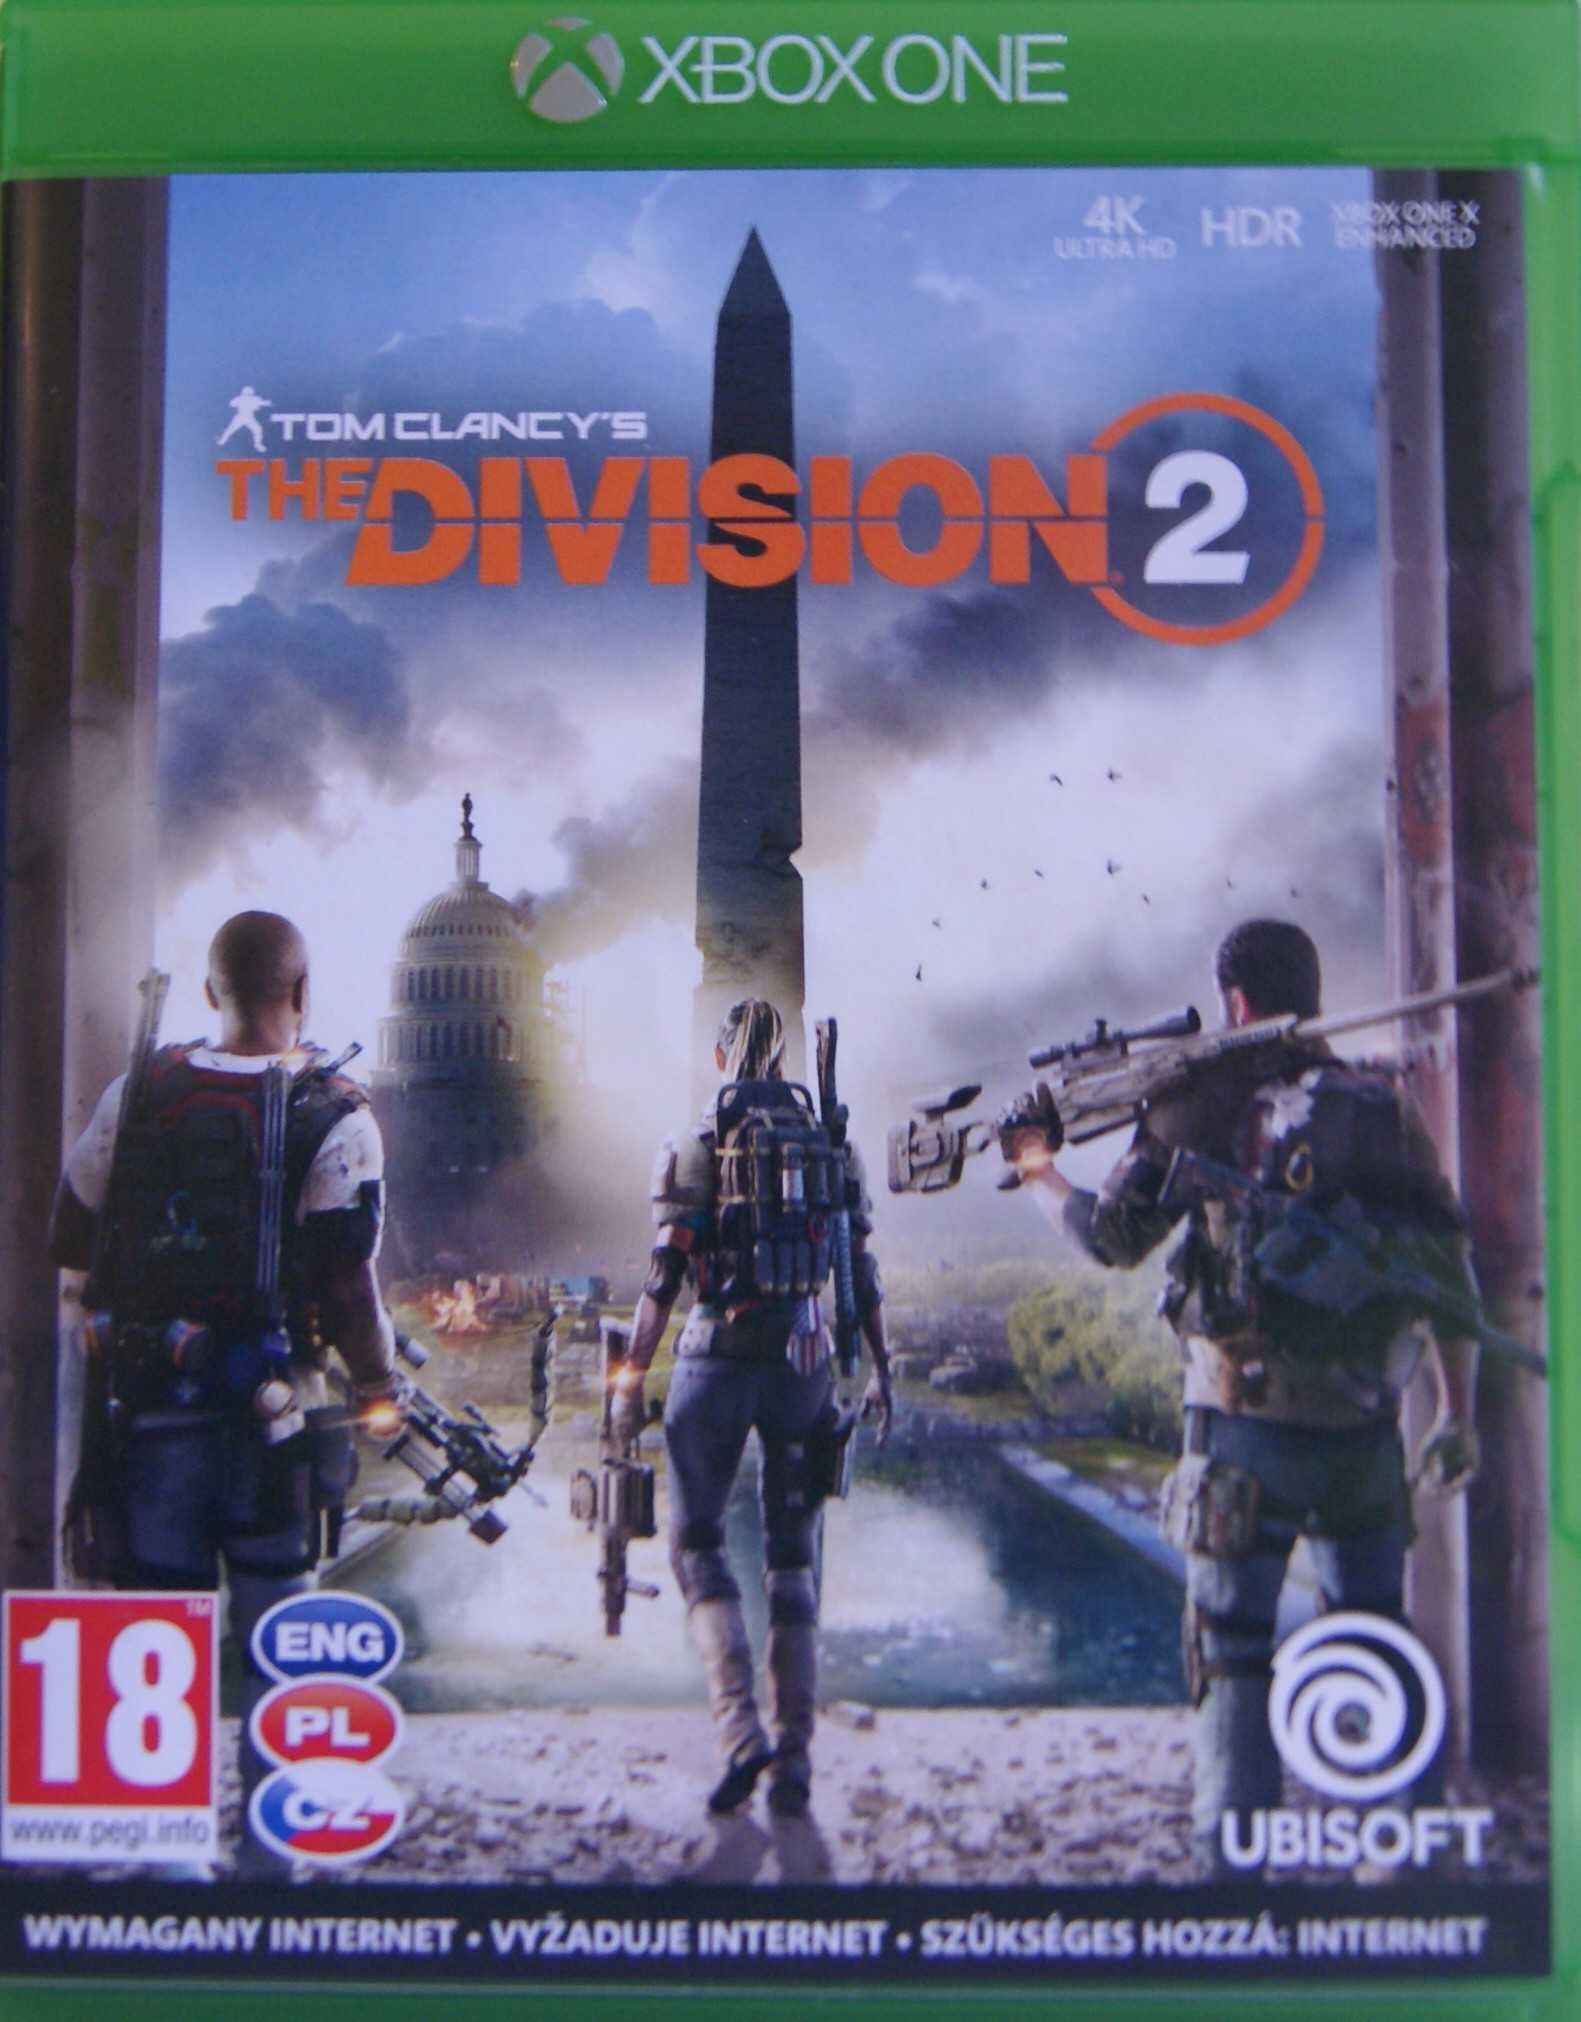 Tom Clancy's The Division 2 PL X-Box One - Rybnik Play_gamE